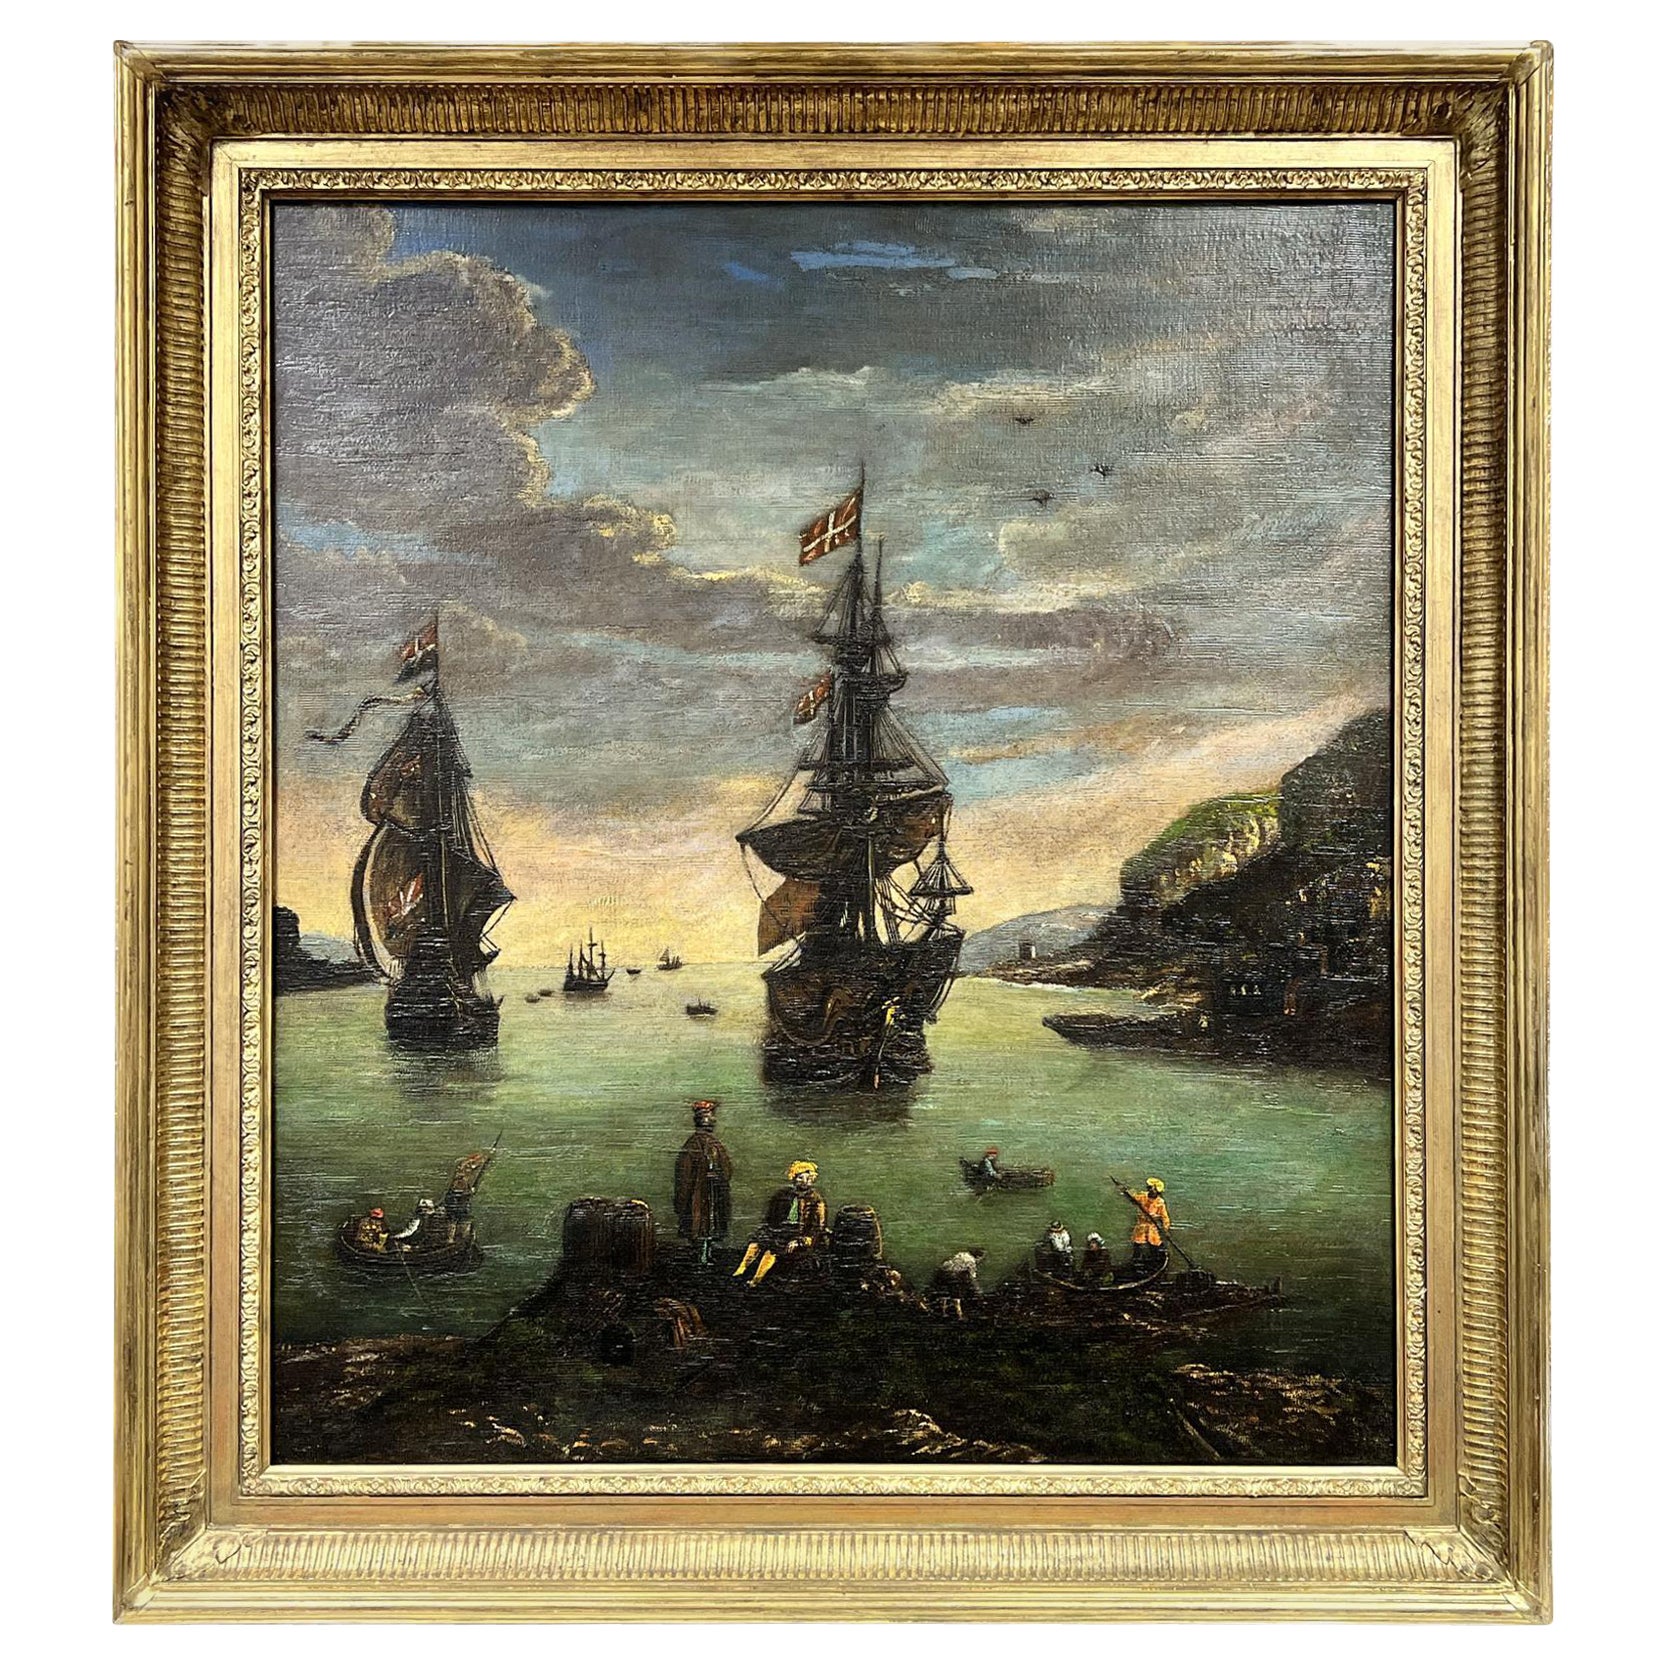 19th Century School Landscape Painting - Huge European Antique Oil Painting Merchants & Ships in Ancient Trading Port